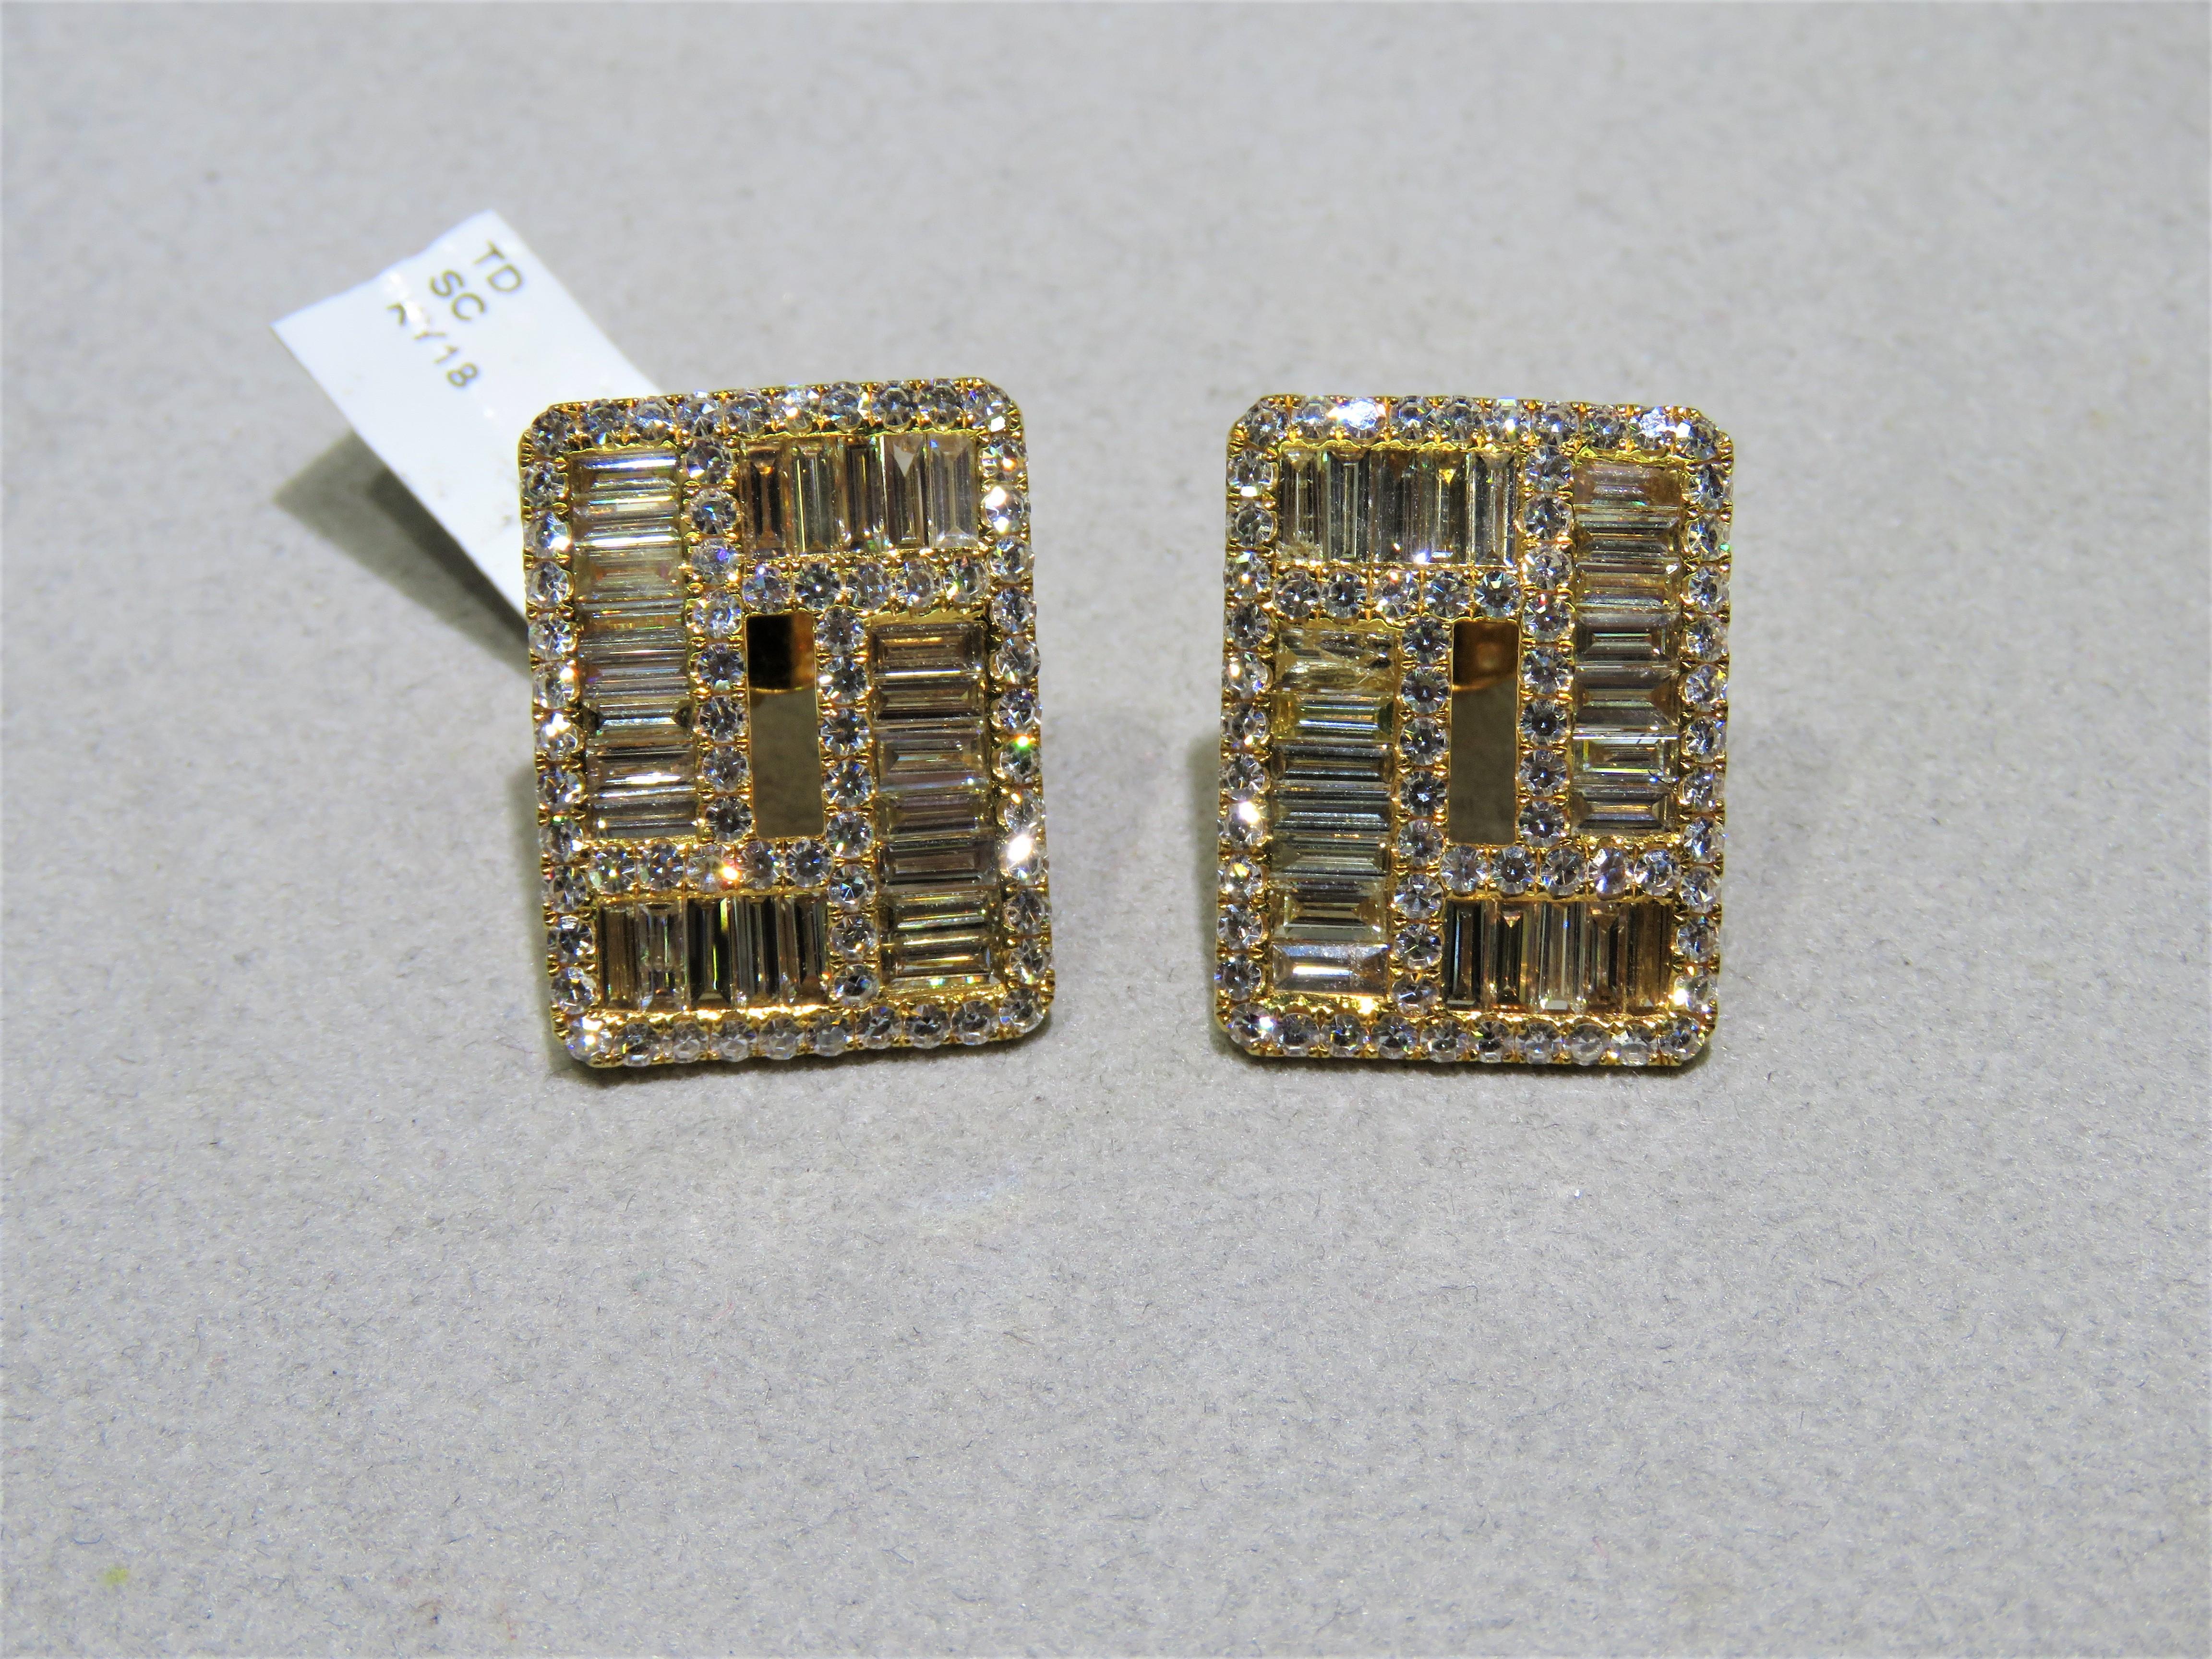 The Following Item we are offering are these Extremely Rare Beautiful 18KT Yellow Gold Fine Large Fancy Baguette Cut Trillion White Diamond Earrings. Each Earring features Rare Gorgeous Glittering Fancy Large Baguette Diamonds adorned with Sparkling